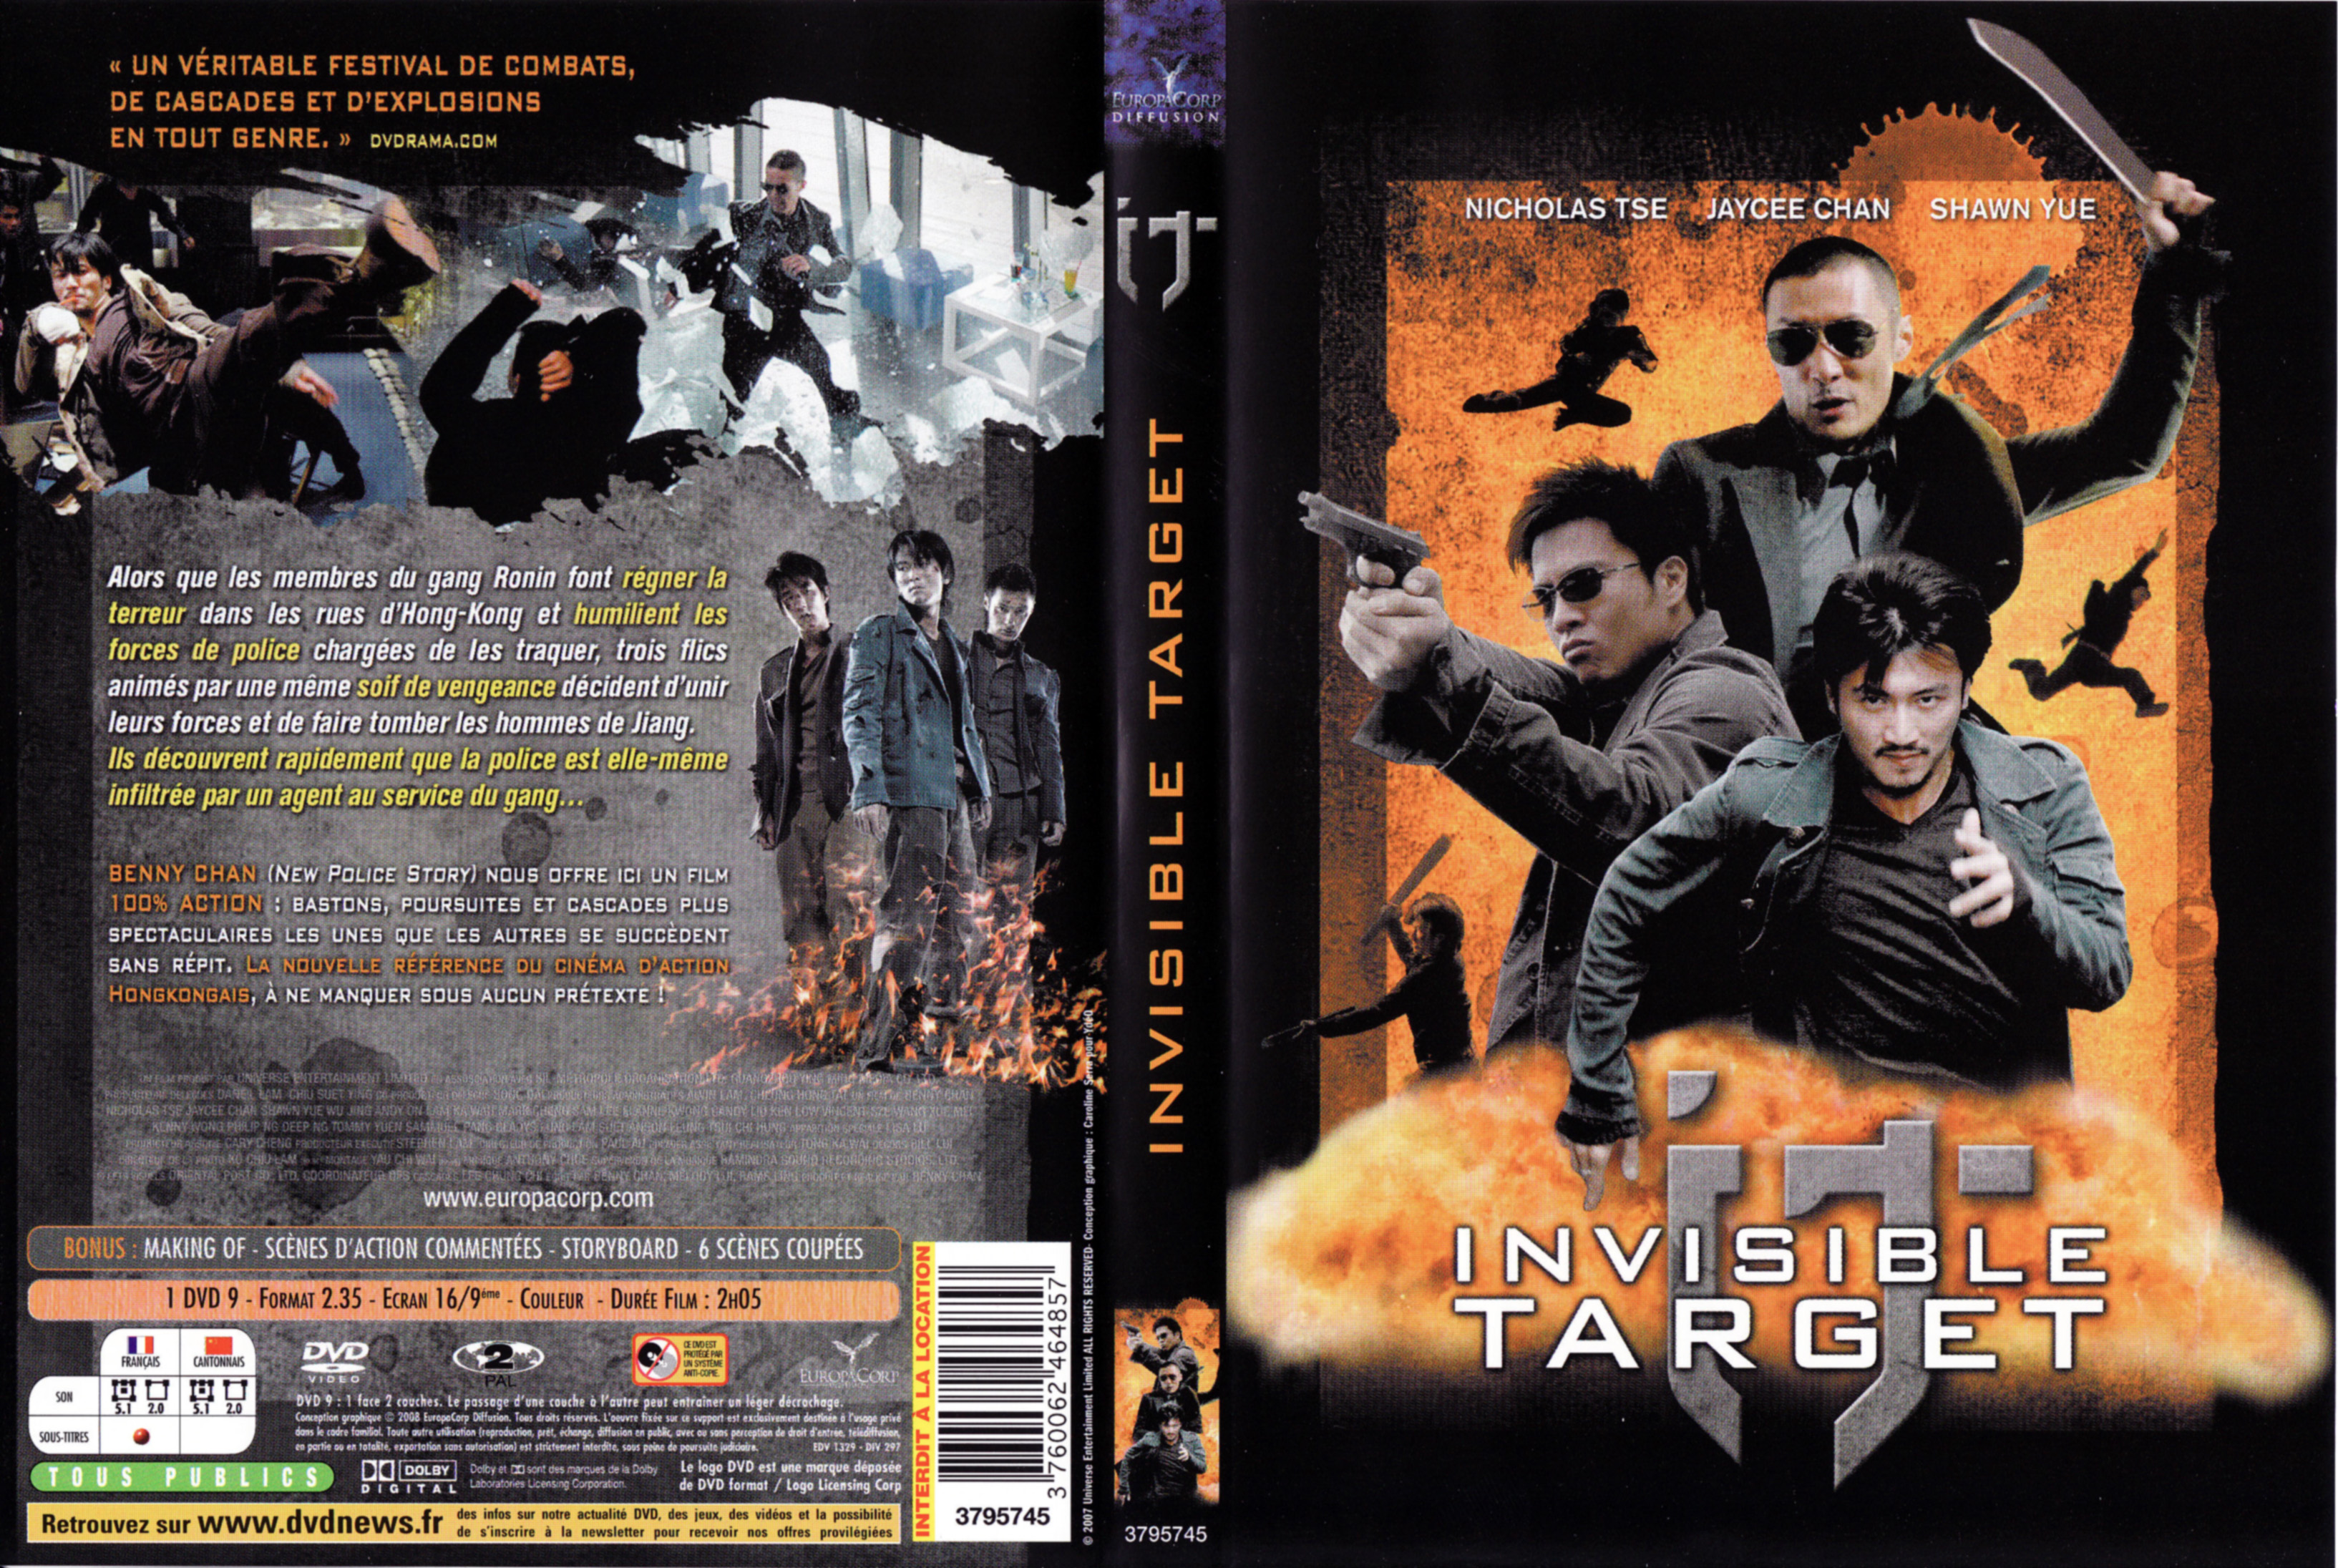 Jaquette DVD Invisible target